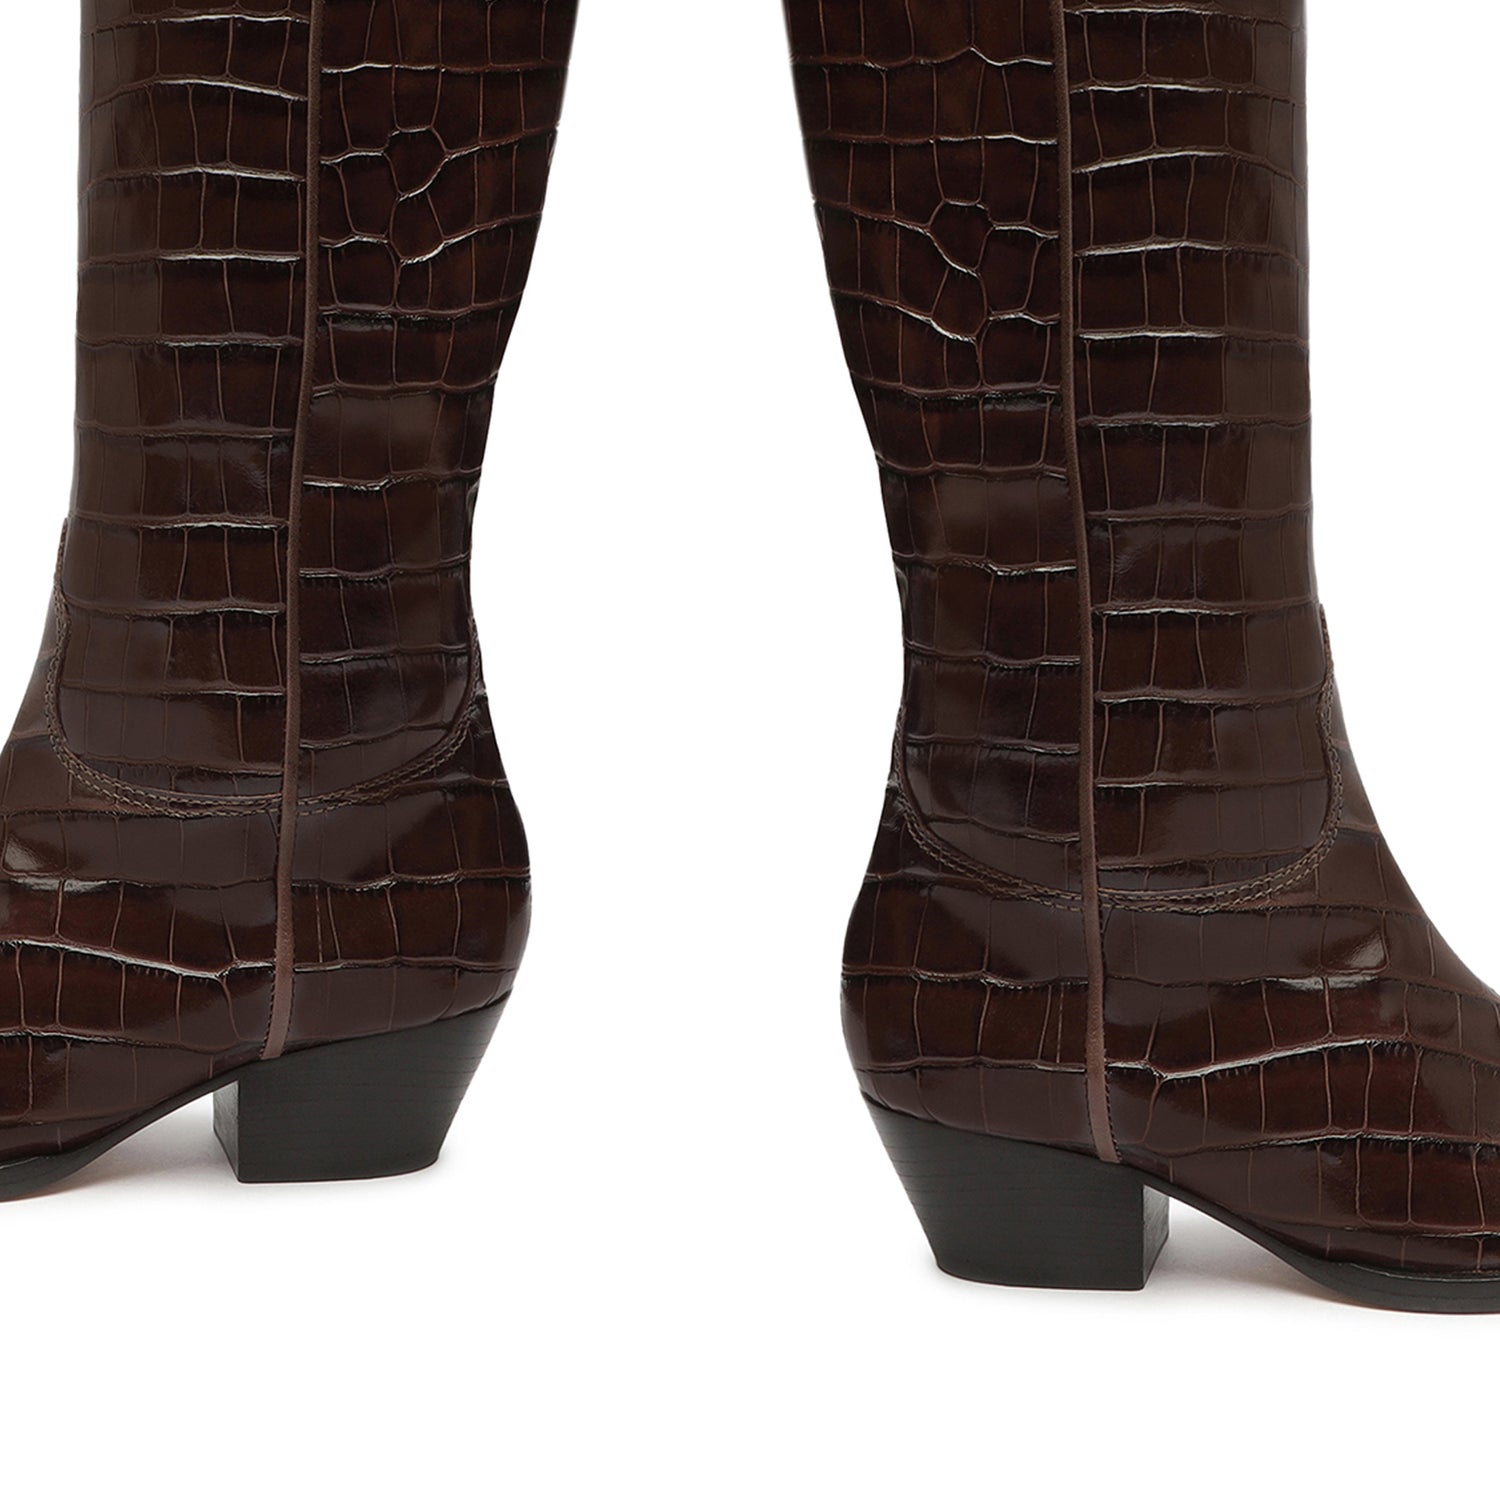 Tessie Casual Up Crocodile-Embossed Leather Boot Boots OLD    - Schutz Shoes